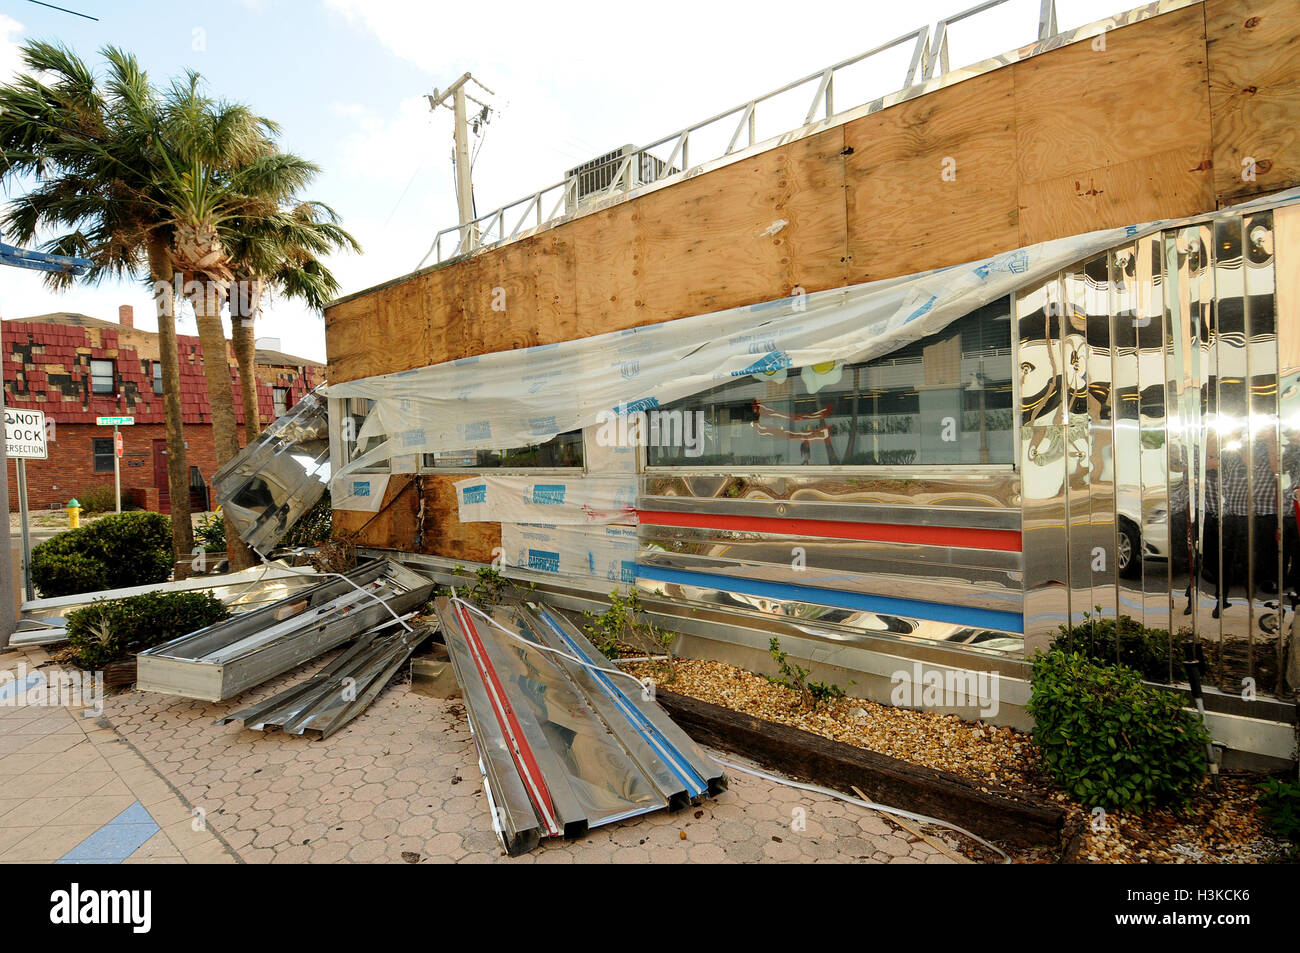 Daytona Beach, Florida, USA. 09th Oct, 2016. The heavily damaged Starlite Diner is seen two days after Hurricane Matthew slammed Daytona Beach, Florida. Matthew is one of the strongest hurricanes to ever batter the U.S. coast. © Paul Hennessy/Alamy Live News Credit:  Paul Hennessy/Alamy Live News Stock Photo